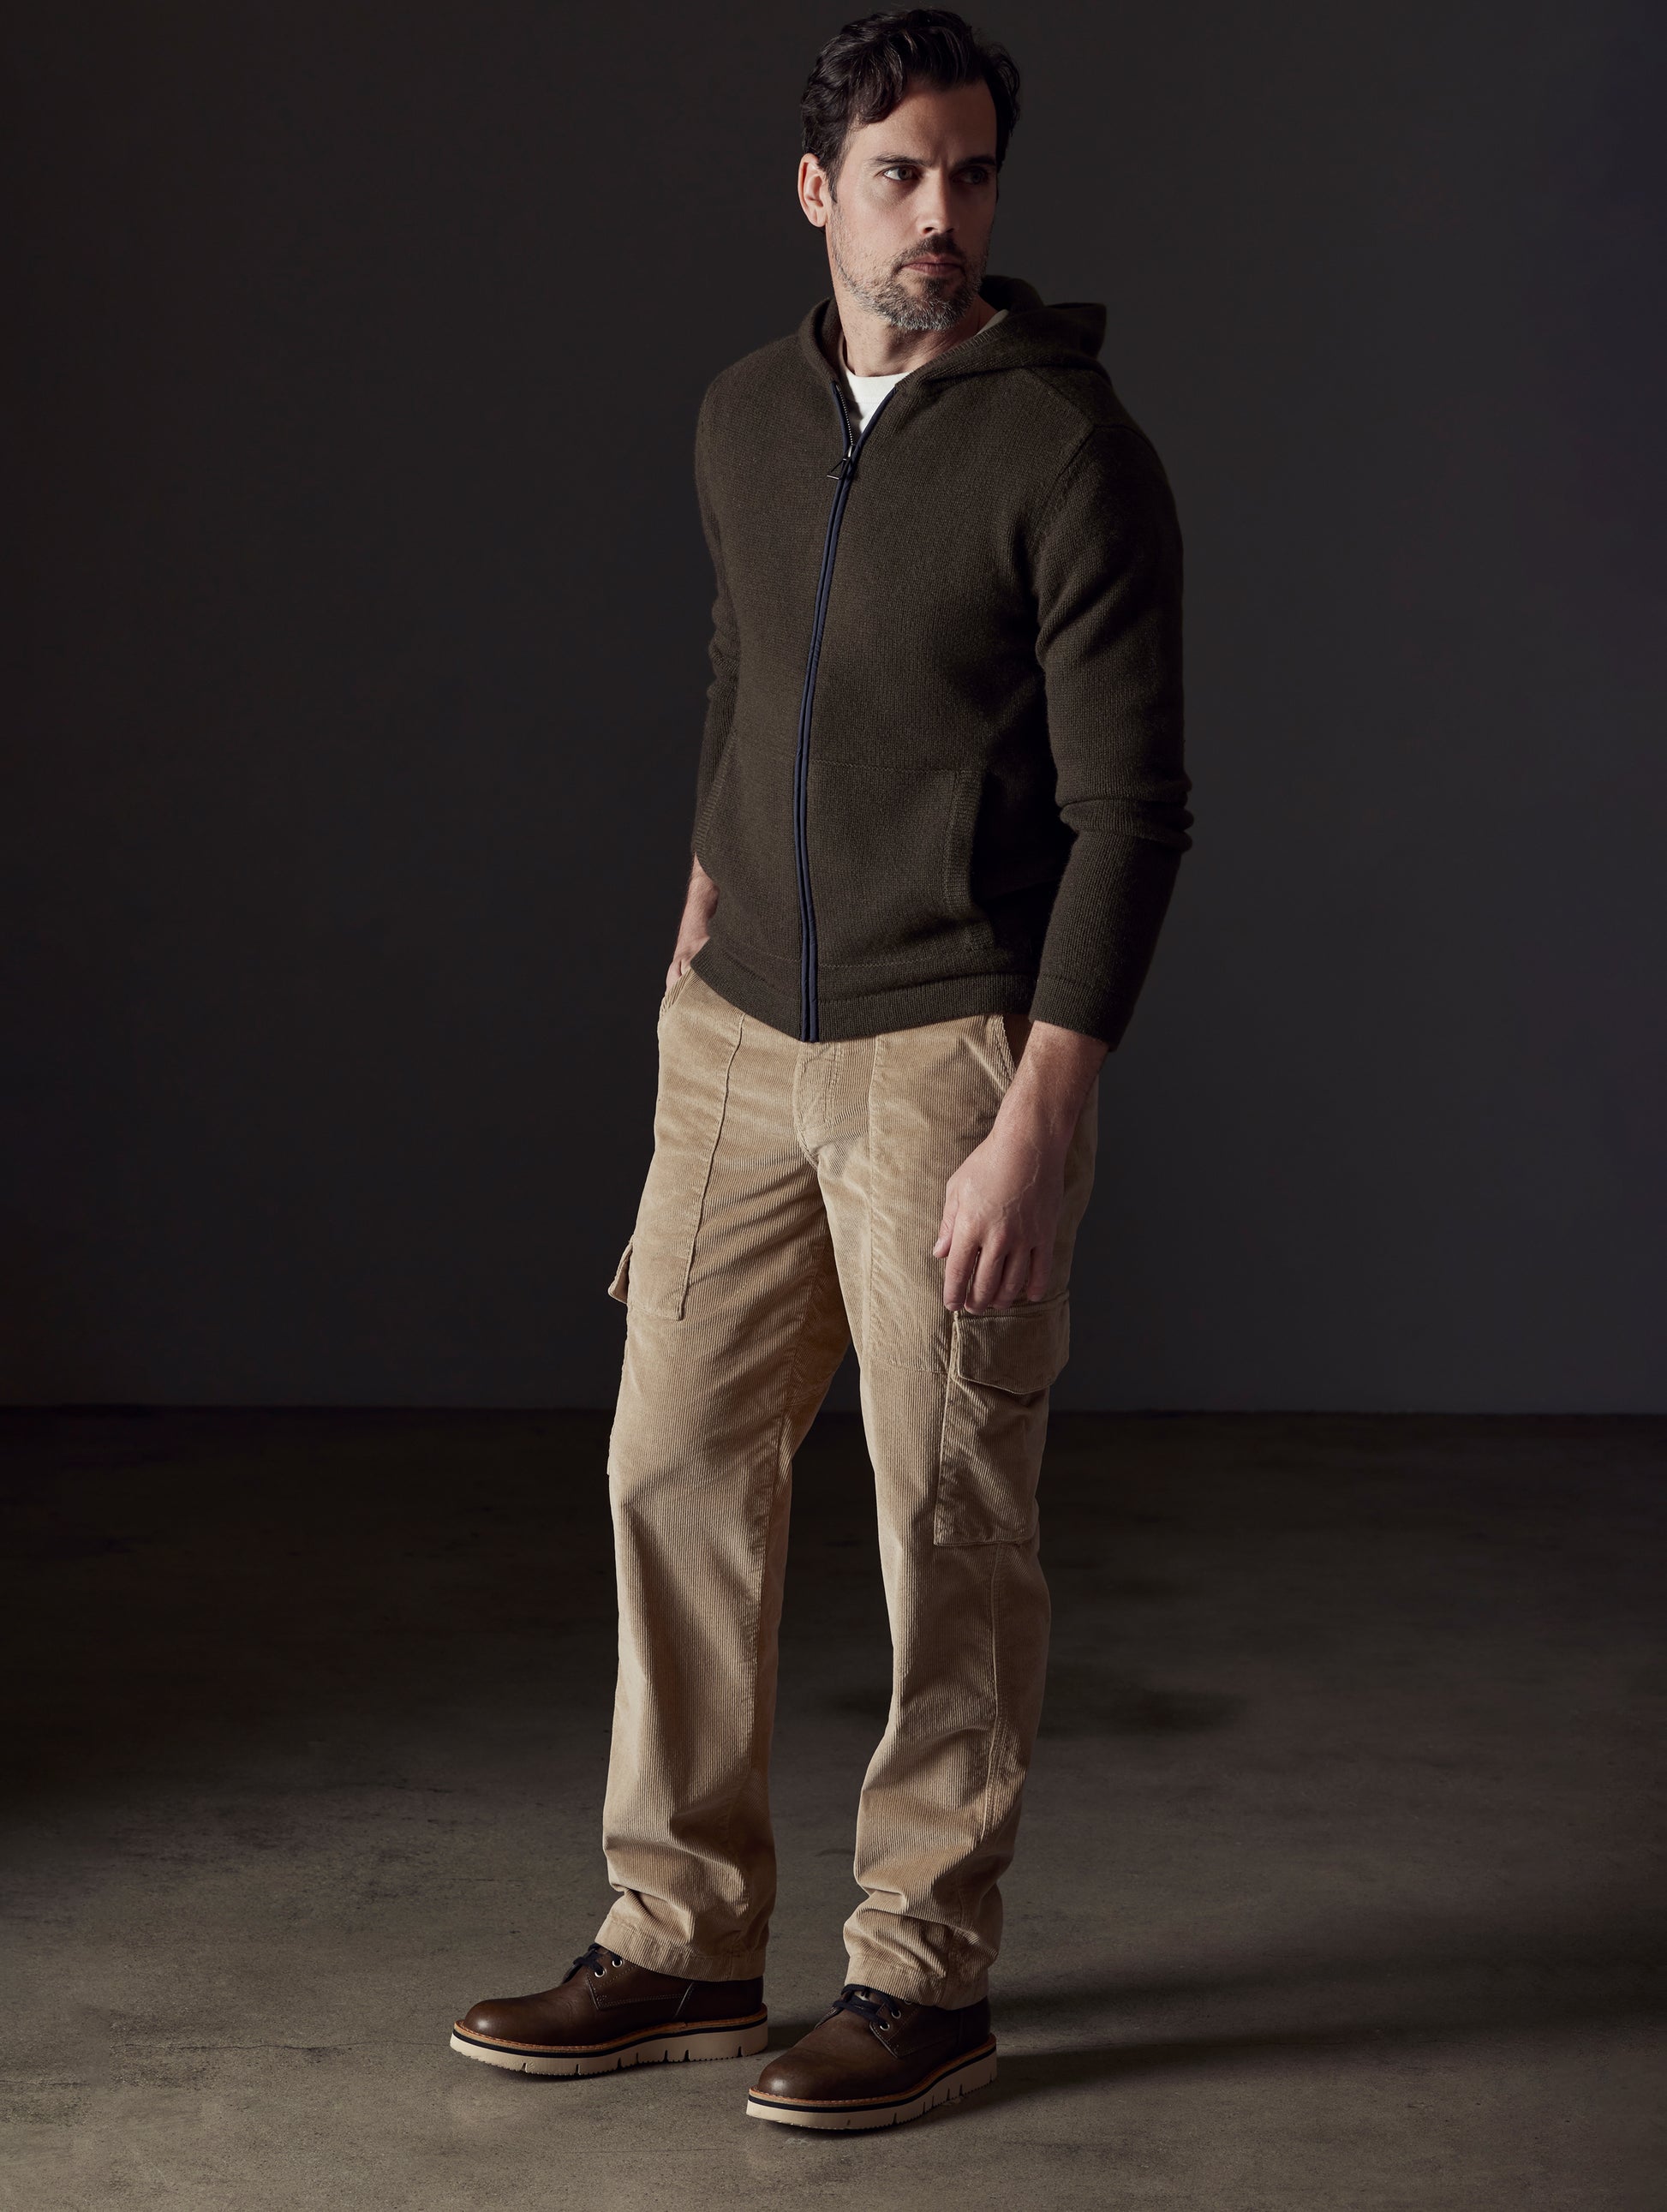 light brown corduroy pant from AETHER Apparel